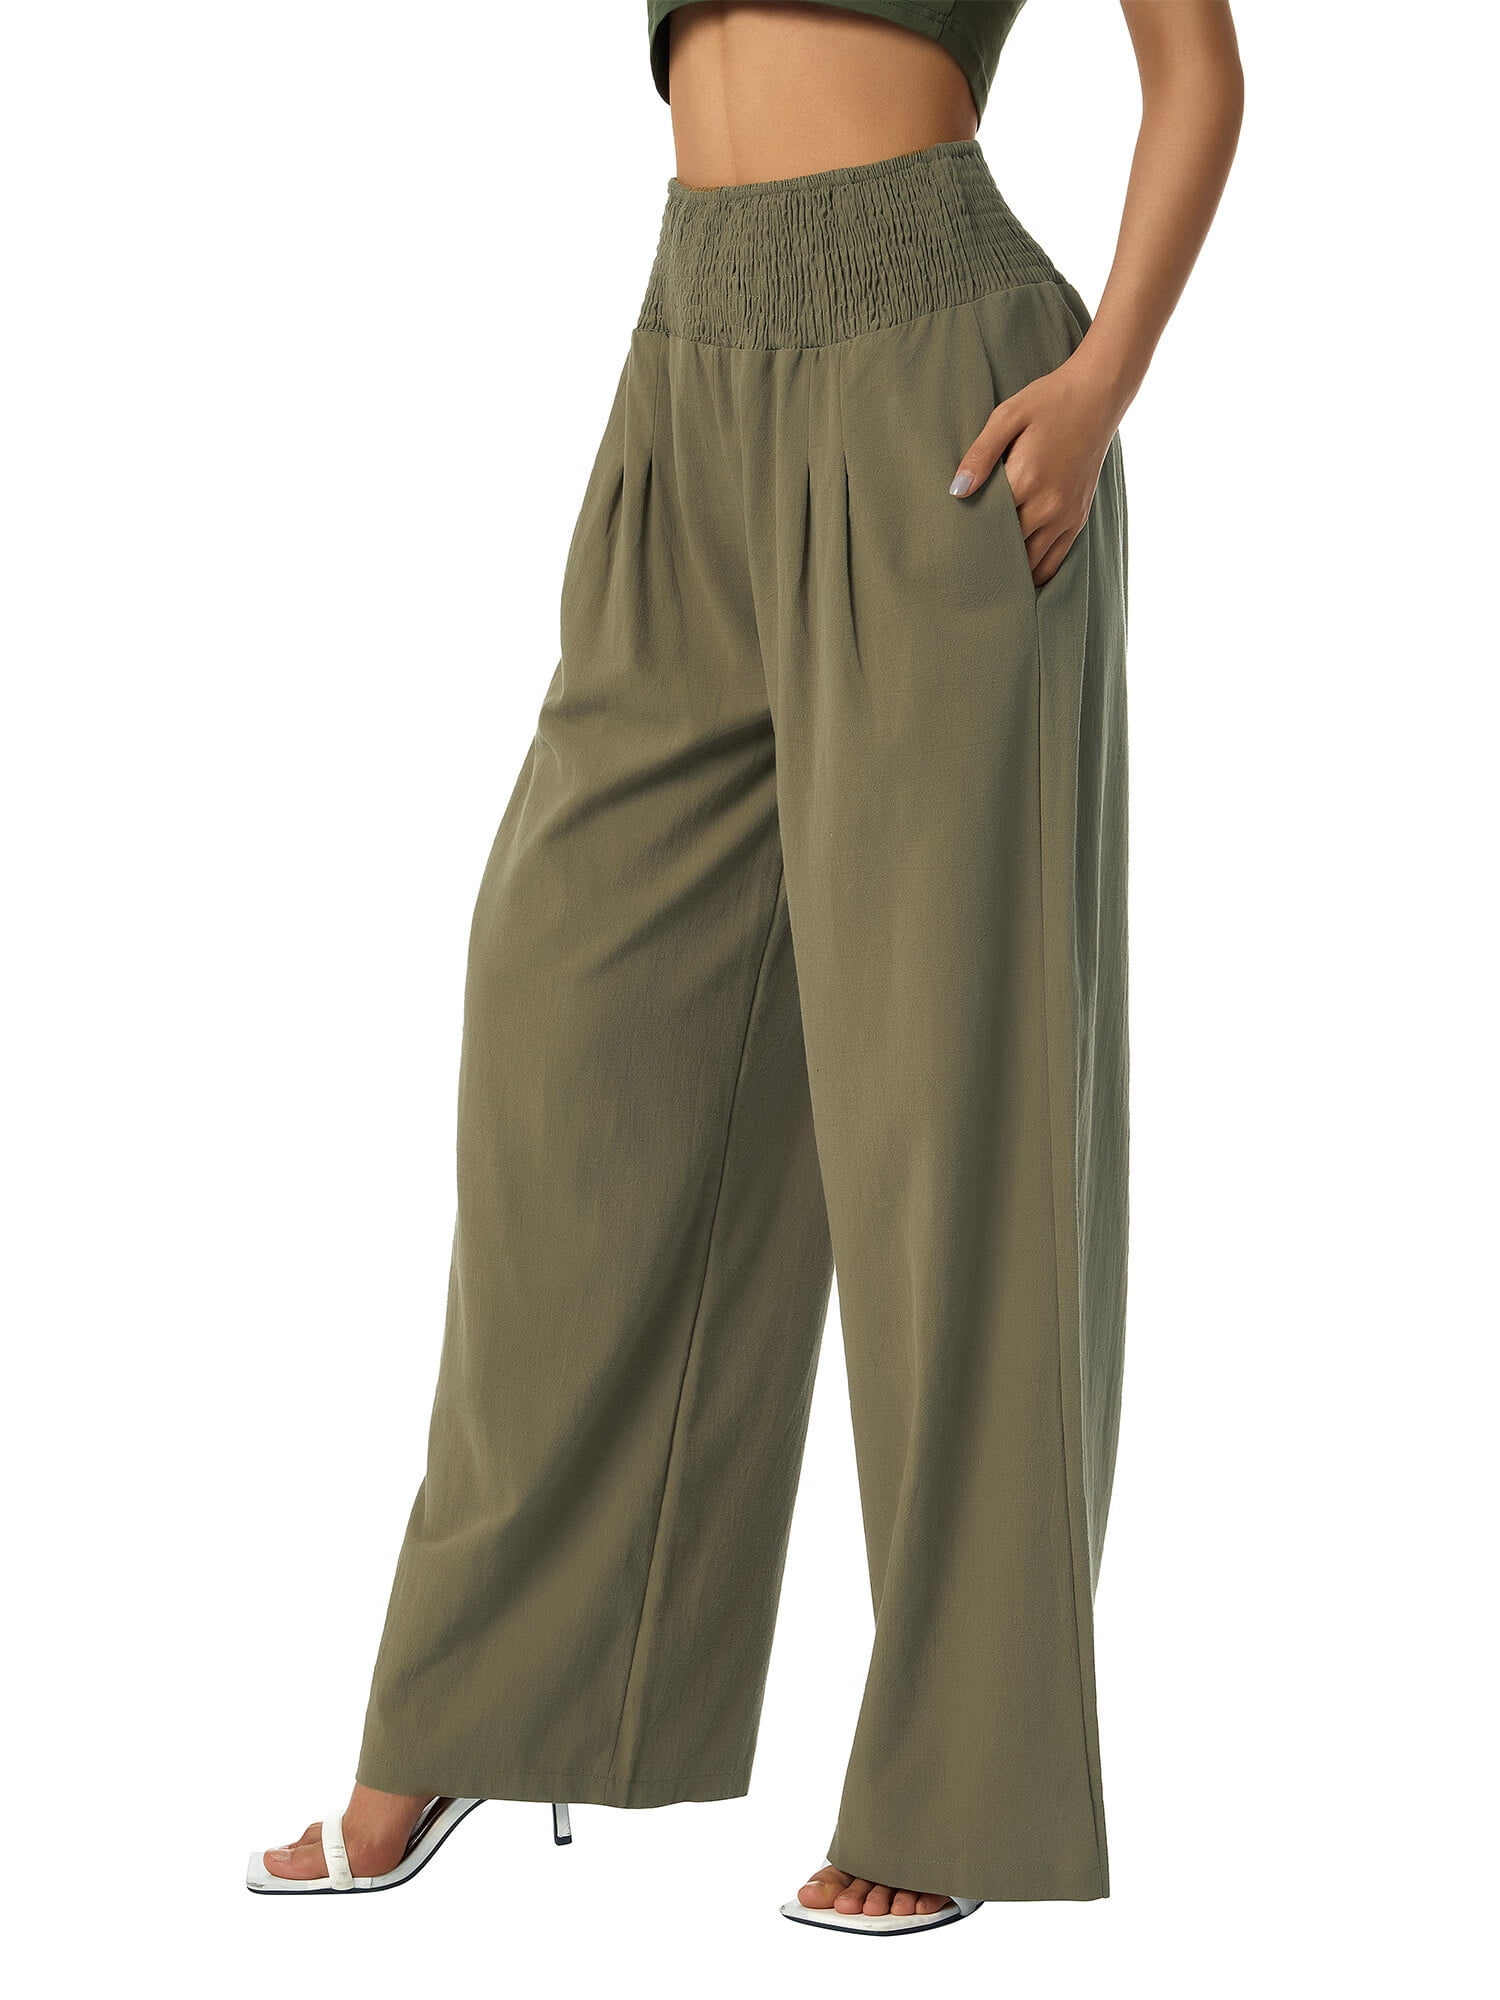 Women Summer High Waisted Cotton Linen Palazzo Pants Wide Leg Long Lounge  Pant Trousers with Pocket